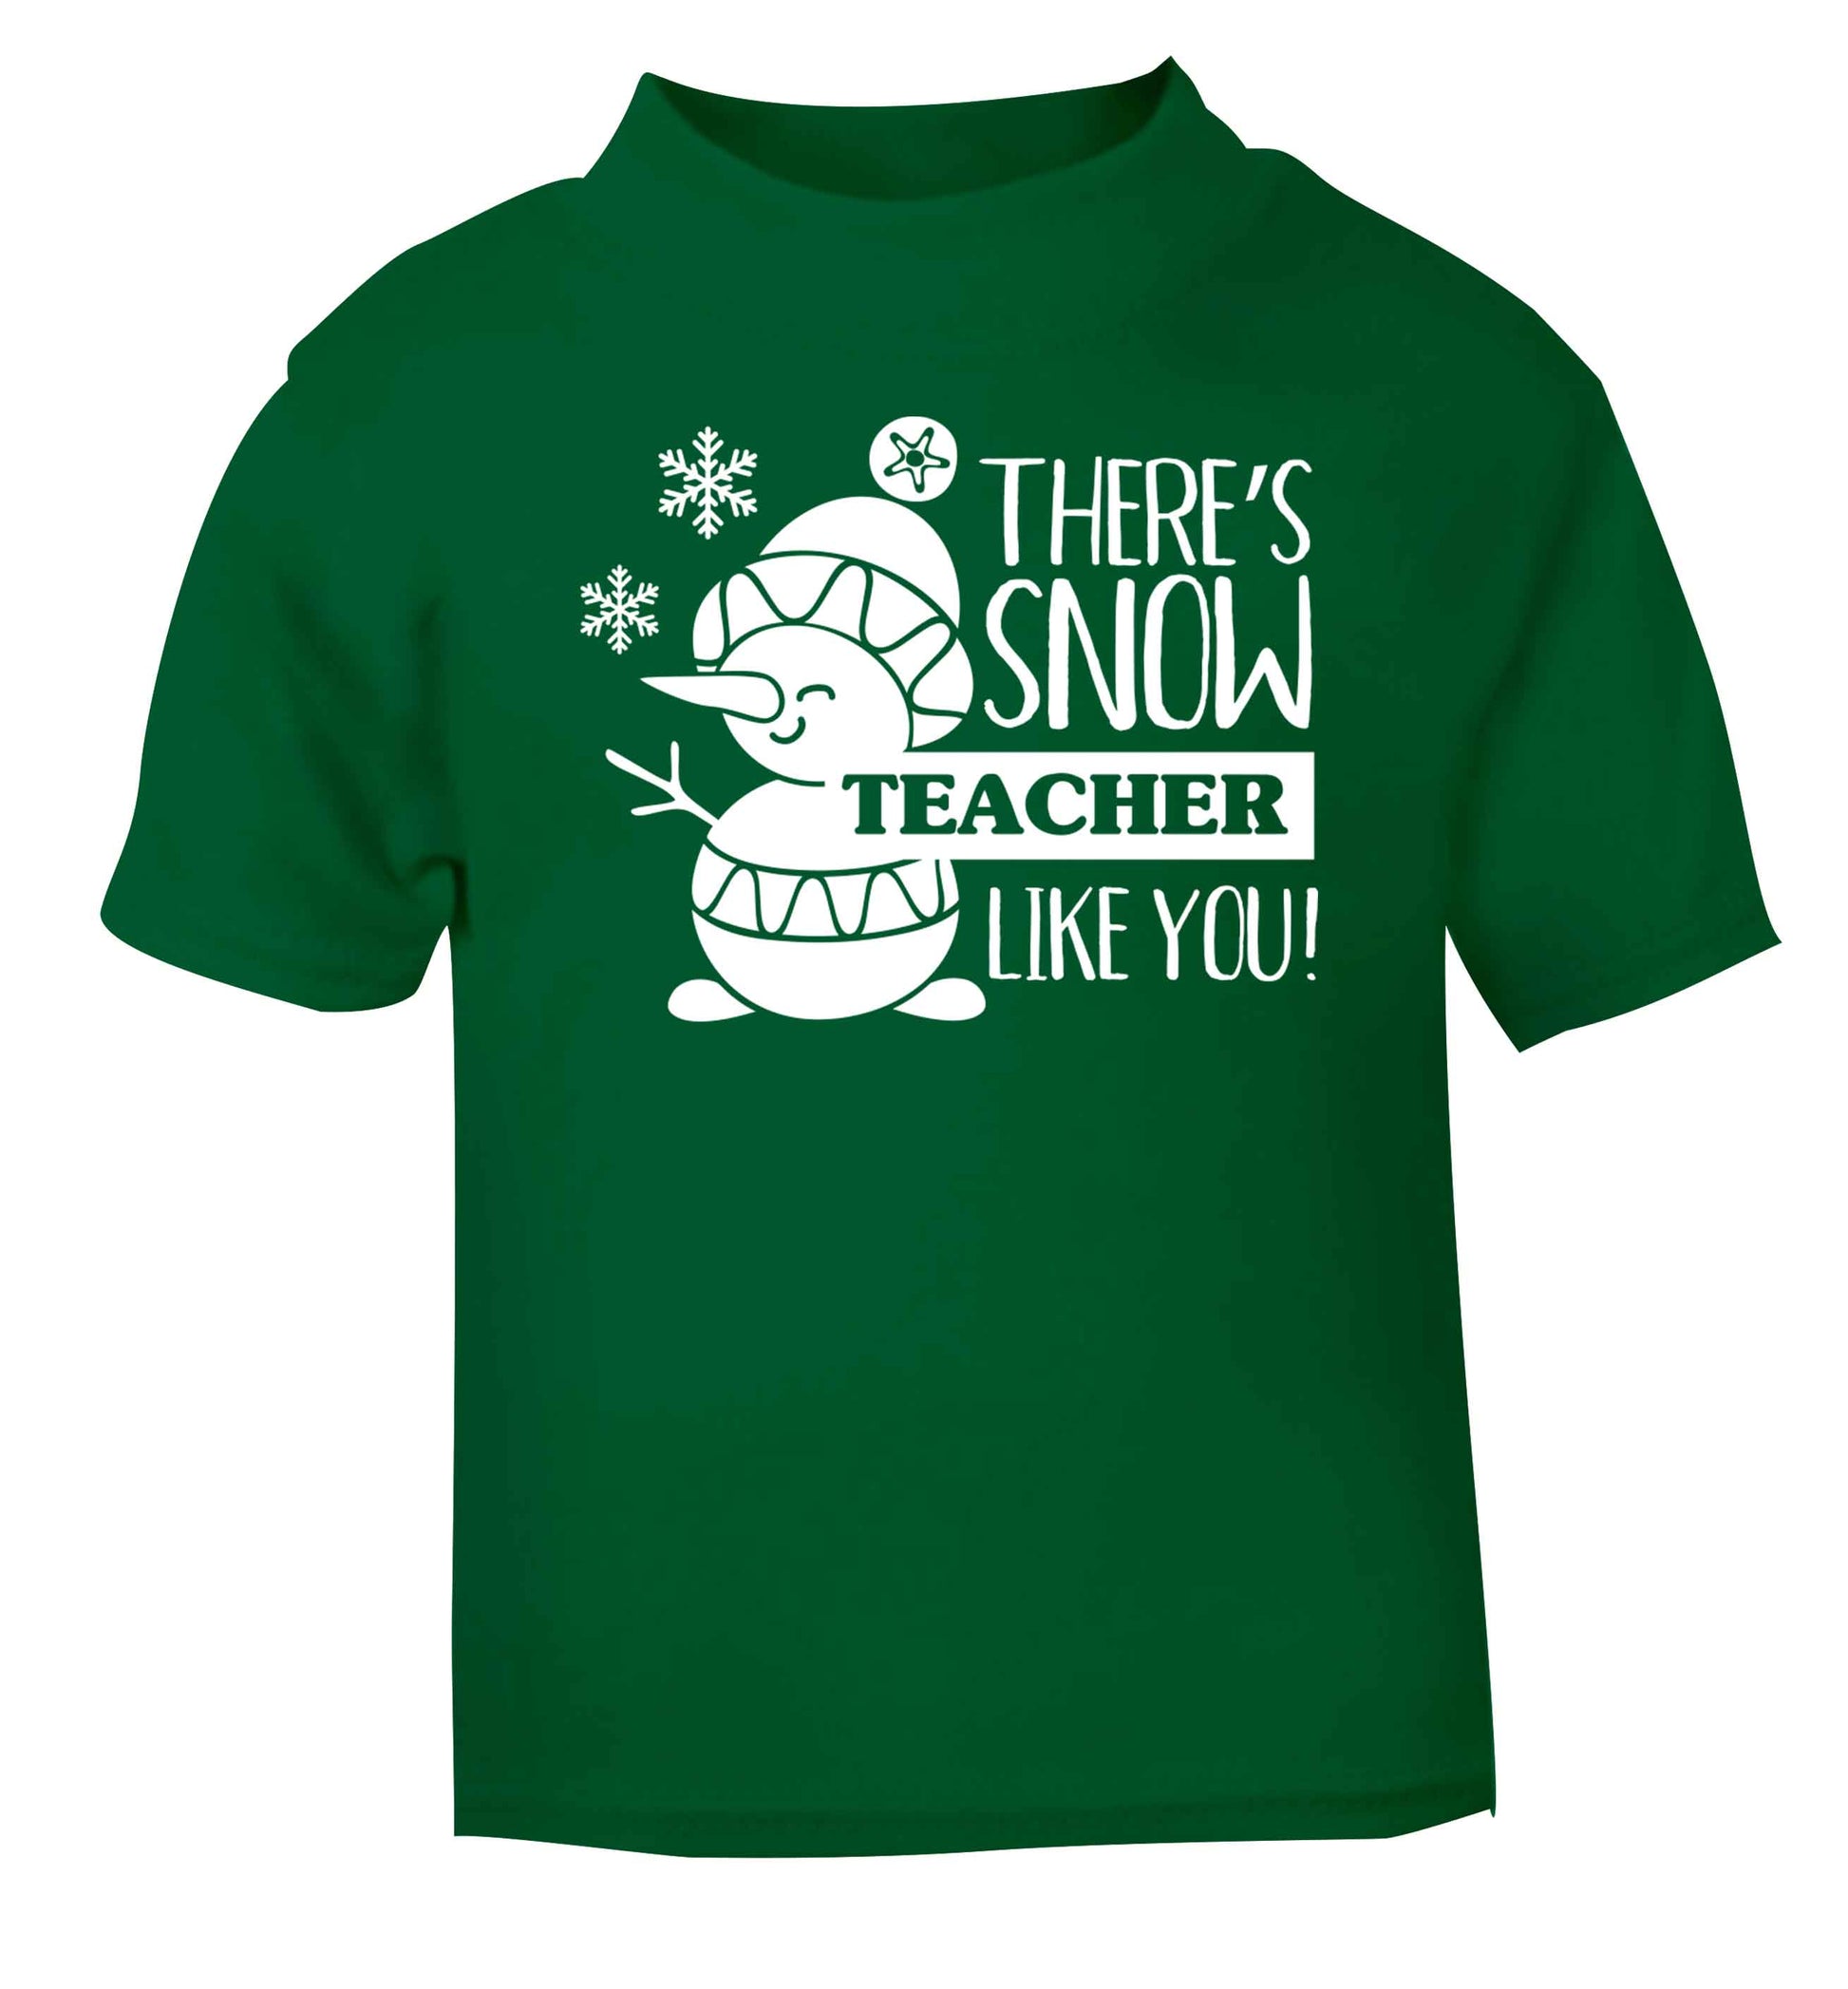 There's snow teacher like you green baby toddler Tshirt 2 Years